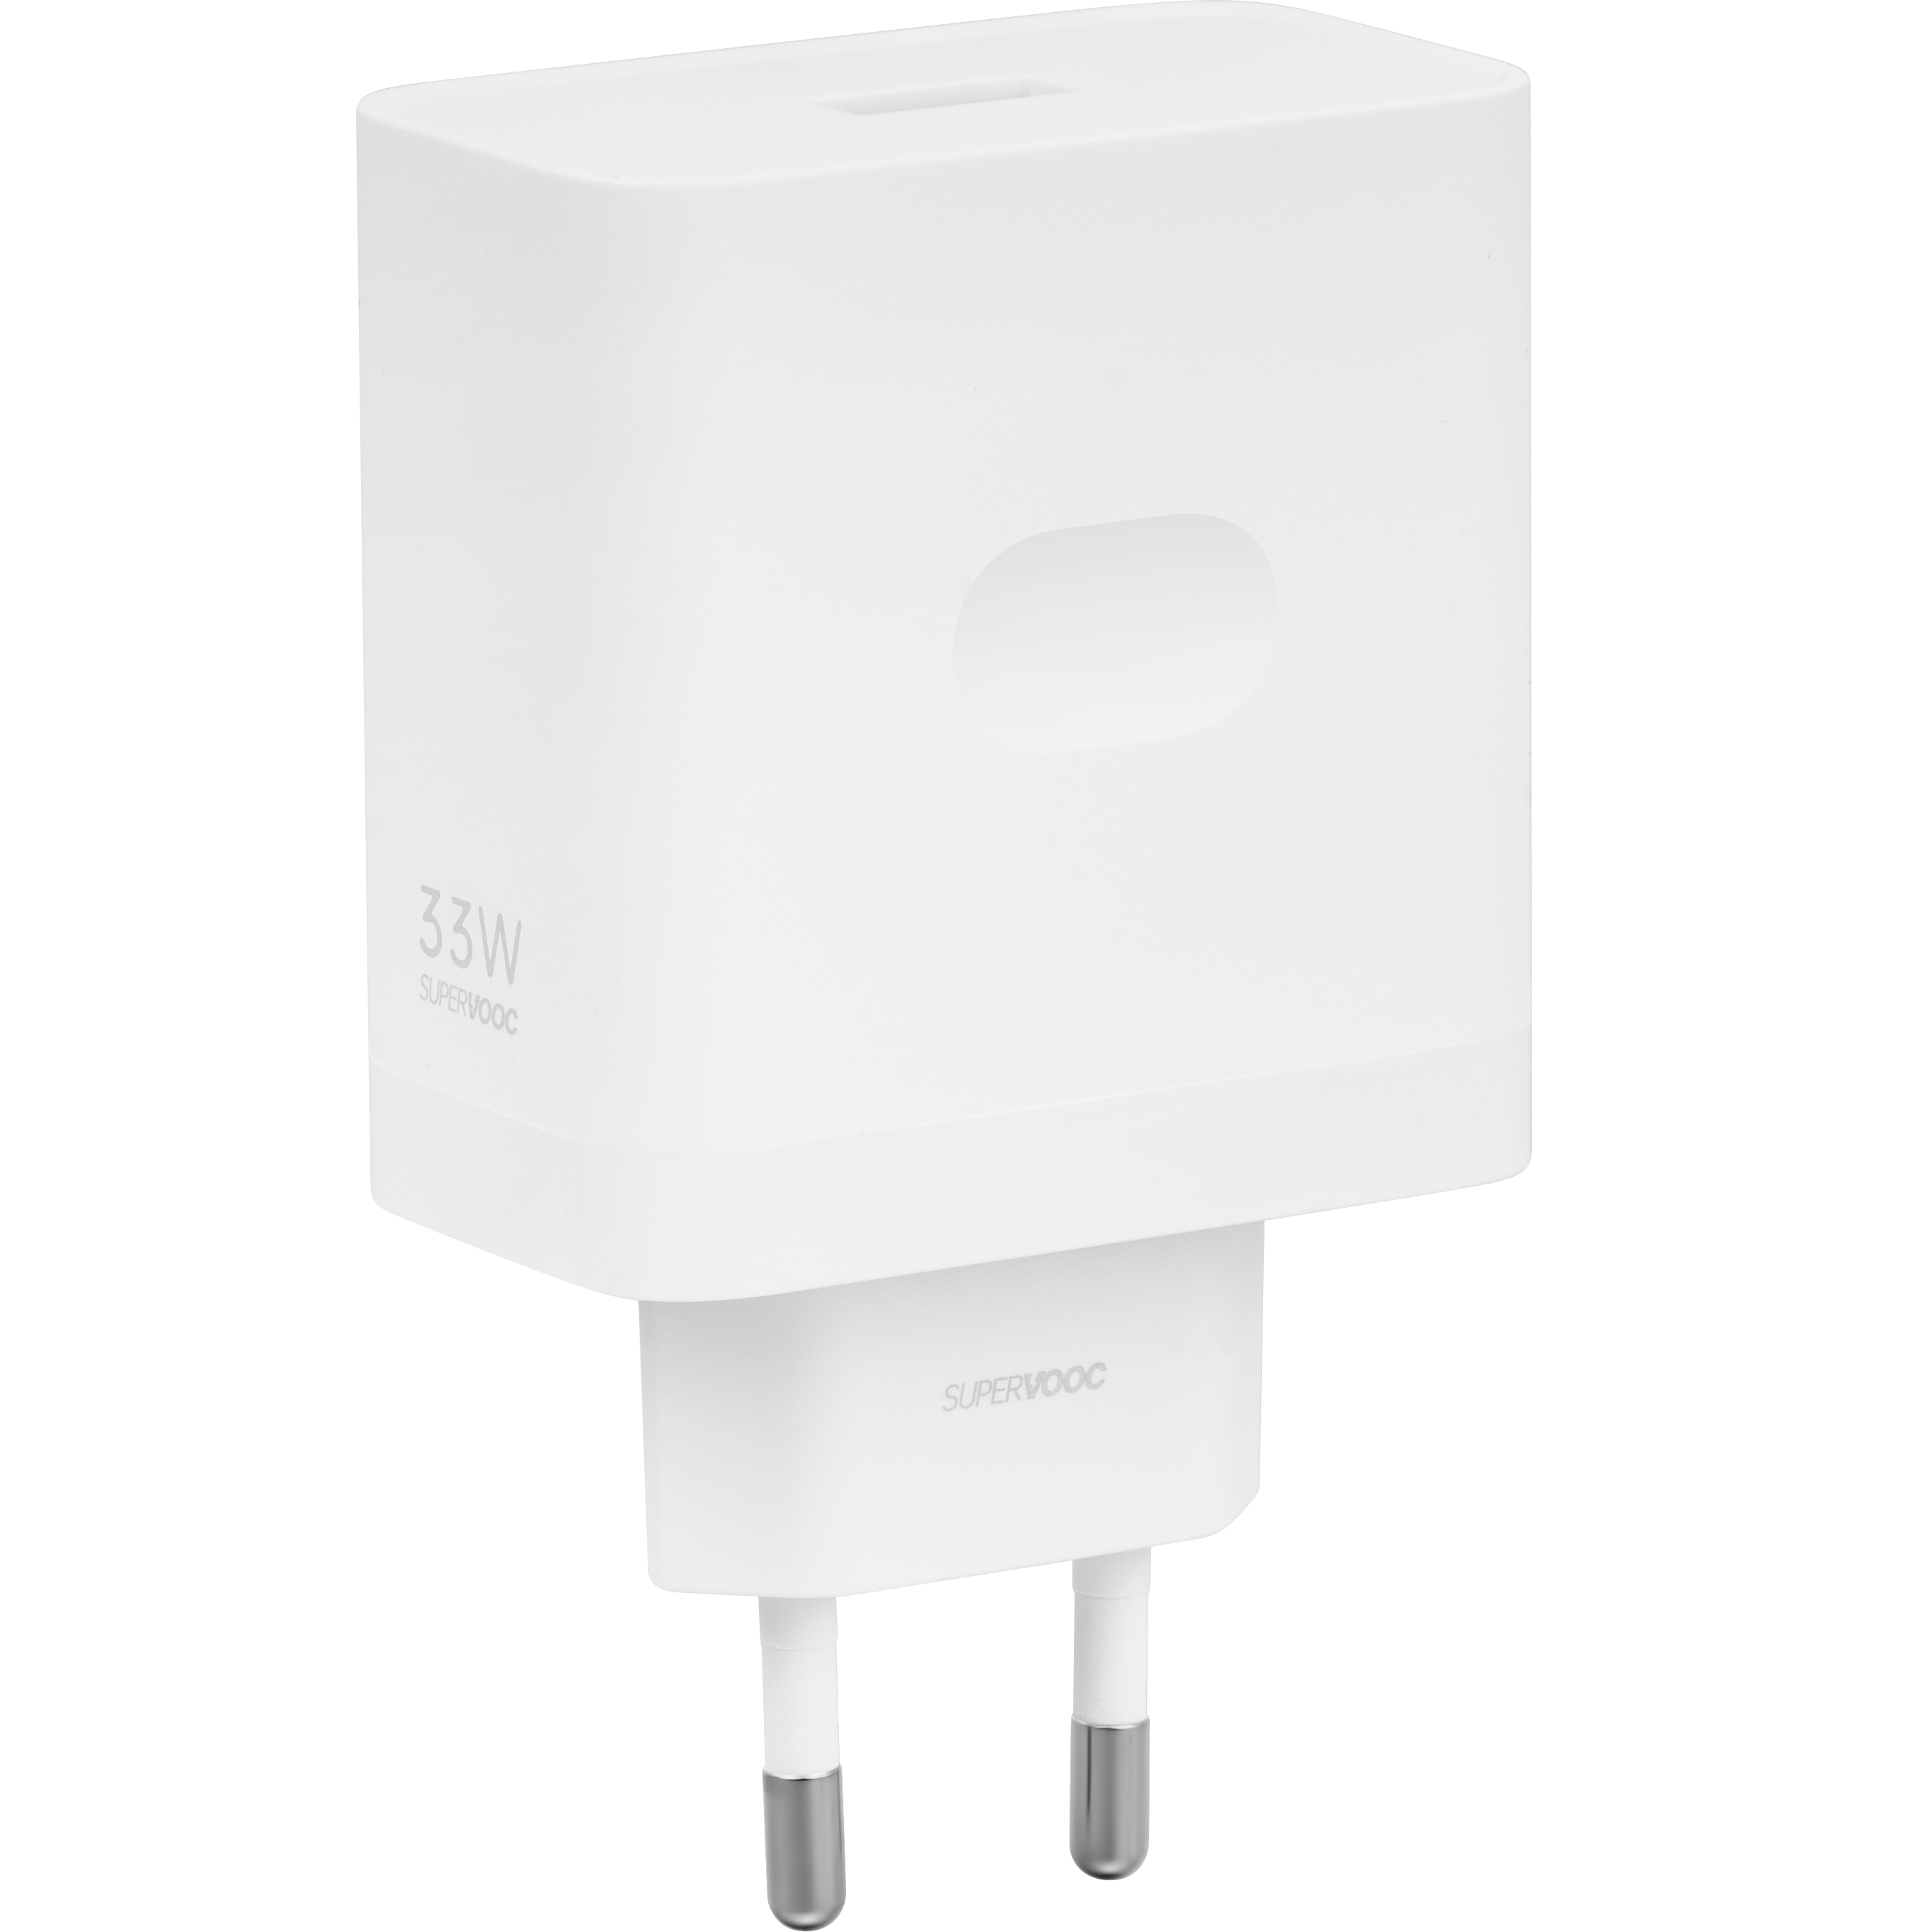 wall-charger-oppo-2C-quick-charge-2C-33w-2C-1x-usb-2C-white-5474179--28service-pack-29